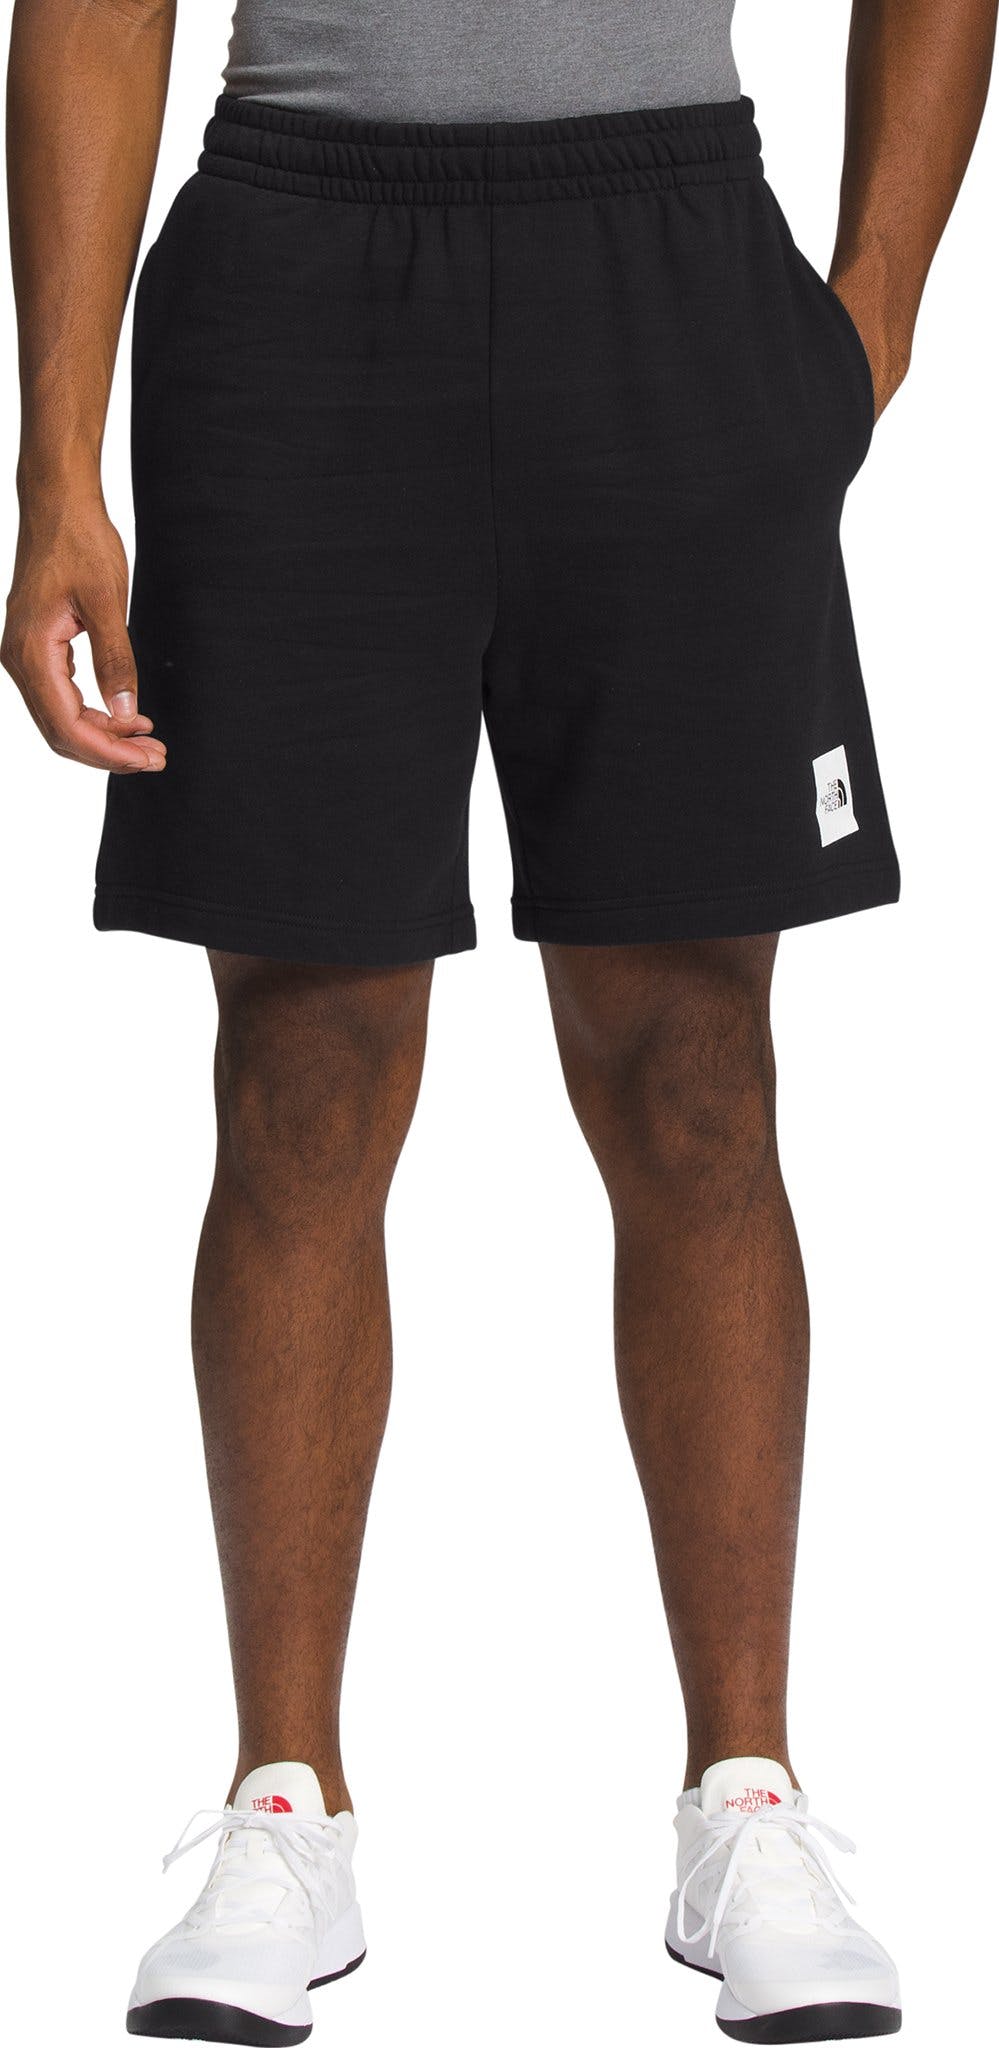 Product image for Box NSE Short - Men's